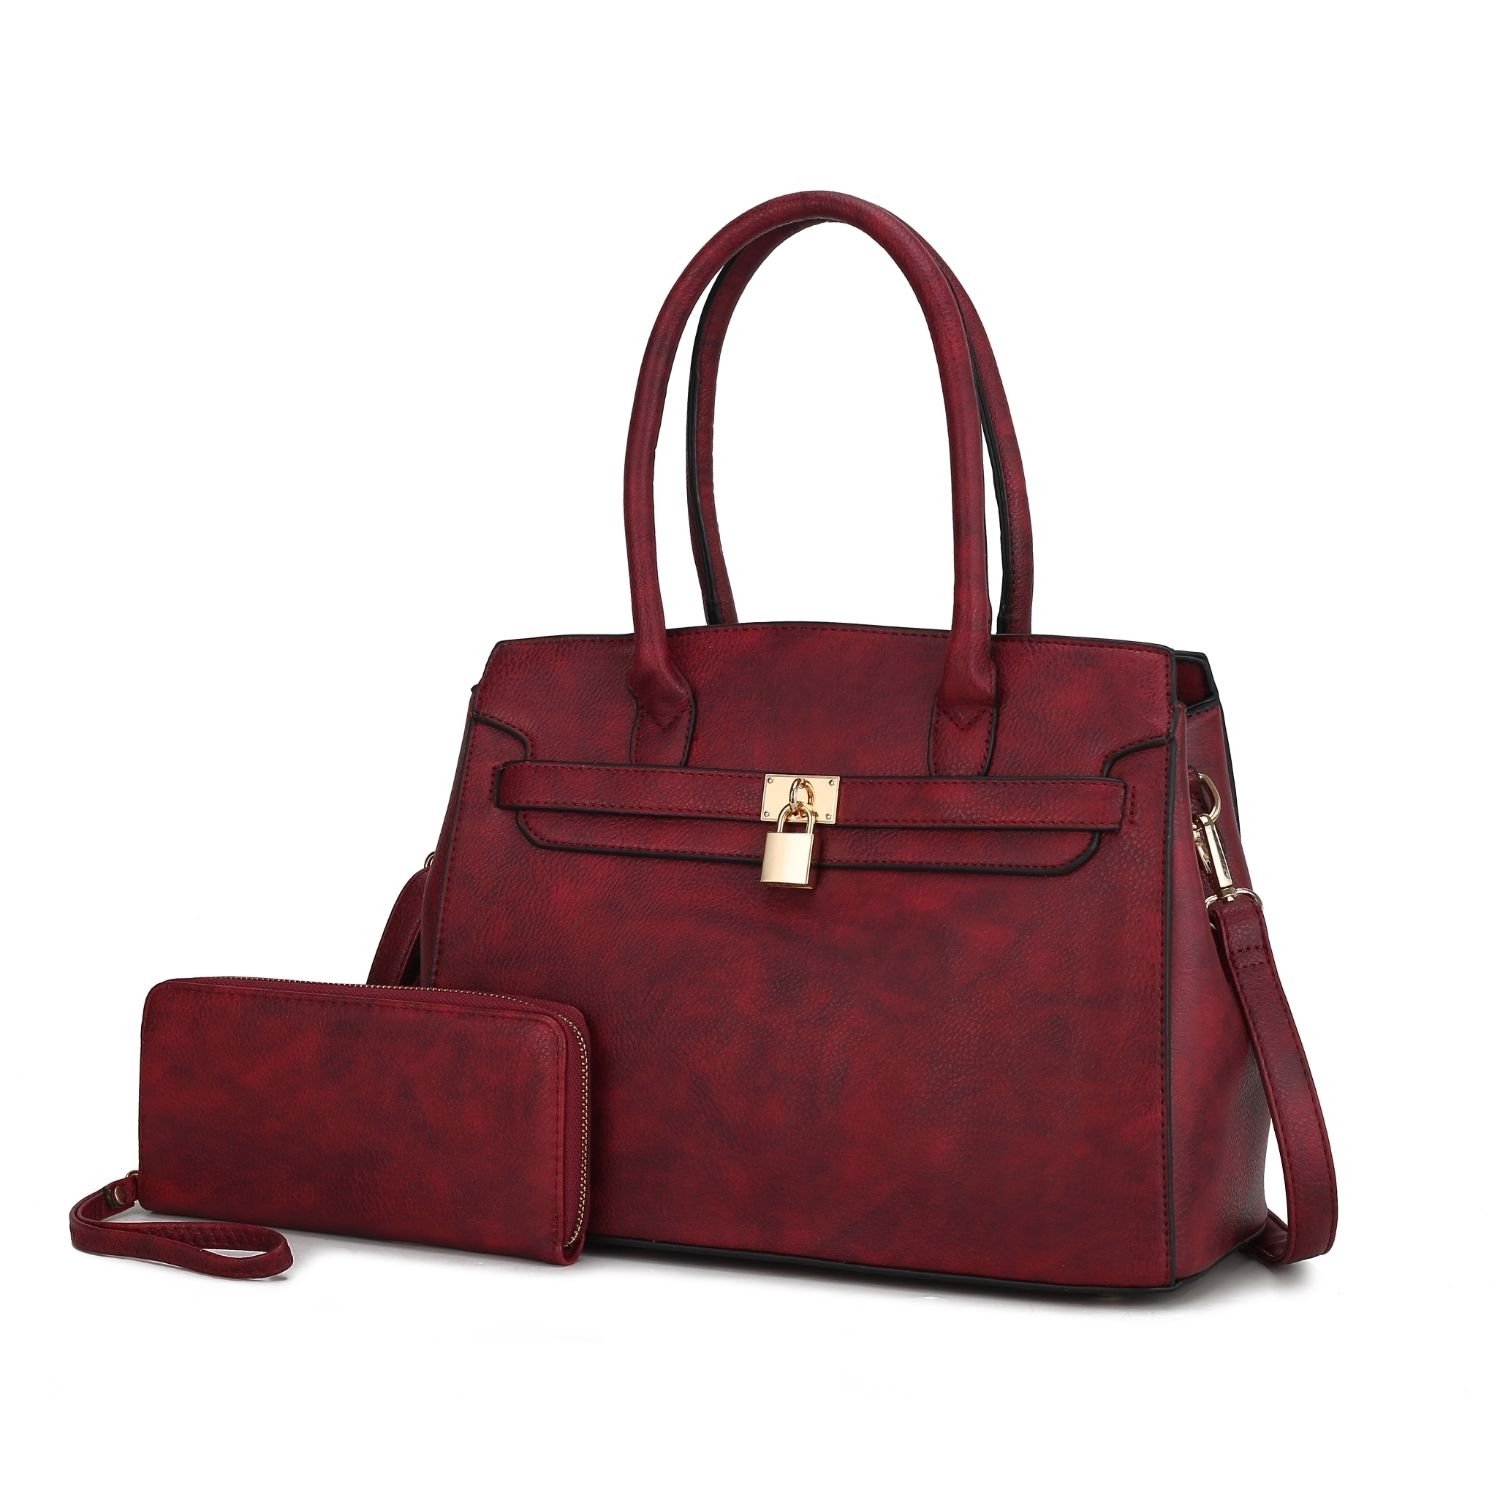 MKF Collection Bruna Satchel Handbag With A Matching Wallet By Mia K -2 Pieces Set - Red